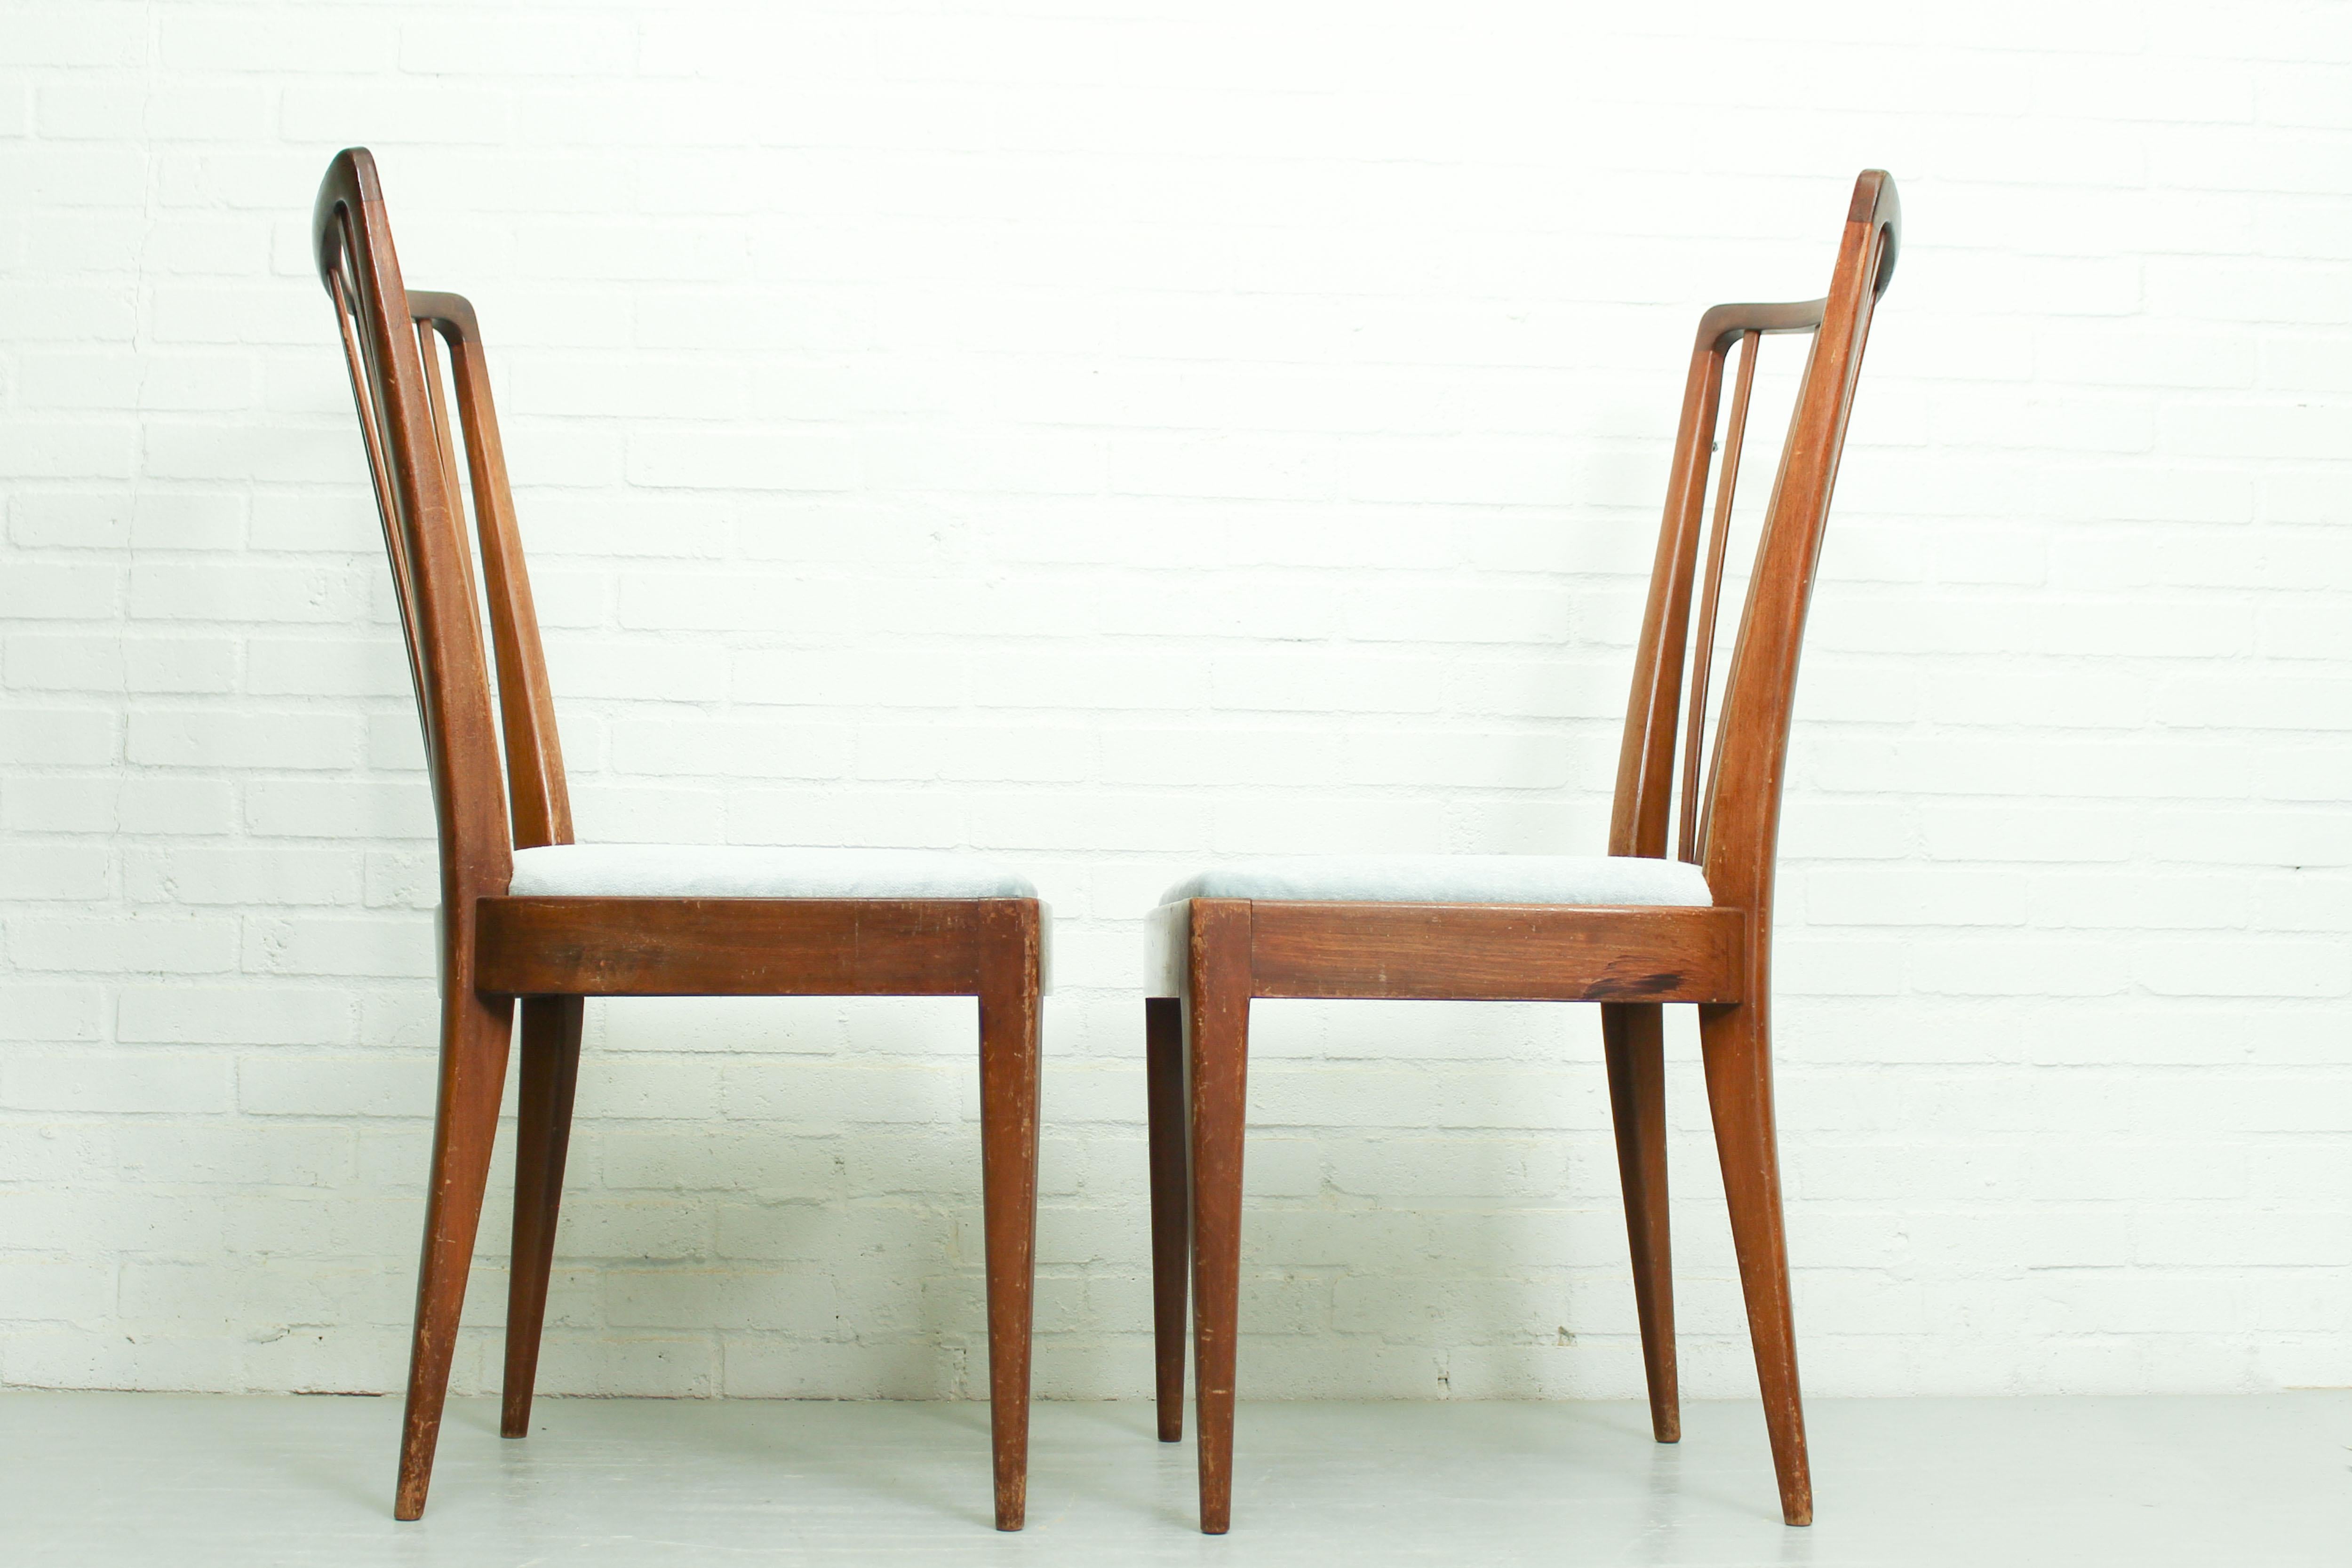 Set of two dining chairs designed by Abraham A. Patijn for Zijlstra Furniture in the Netherlands. The chairs are made out of walnut and are upholstered with beautiful light blue mohair fabric. This design is similar with chairs from Ole Wanscher,